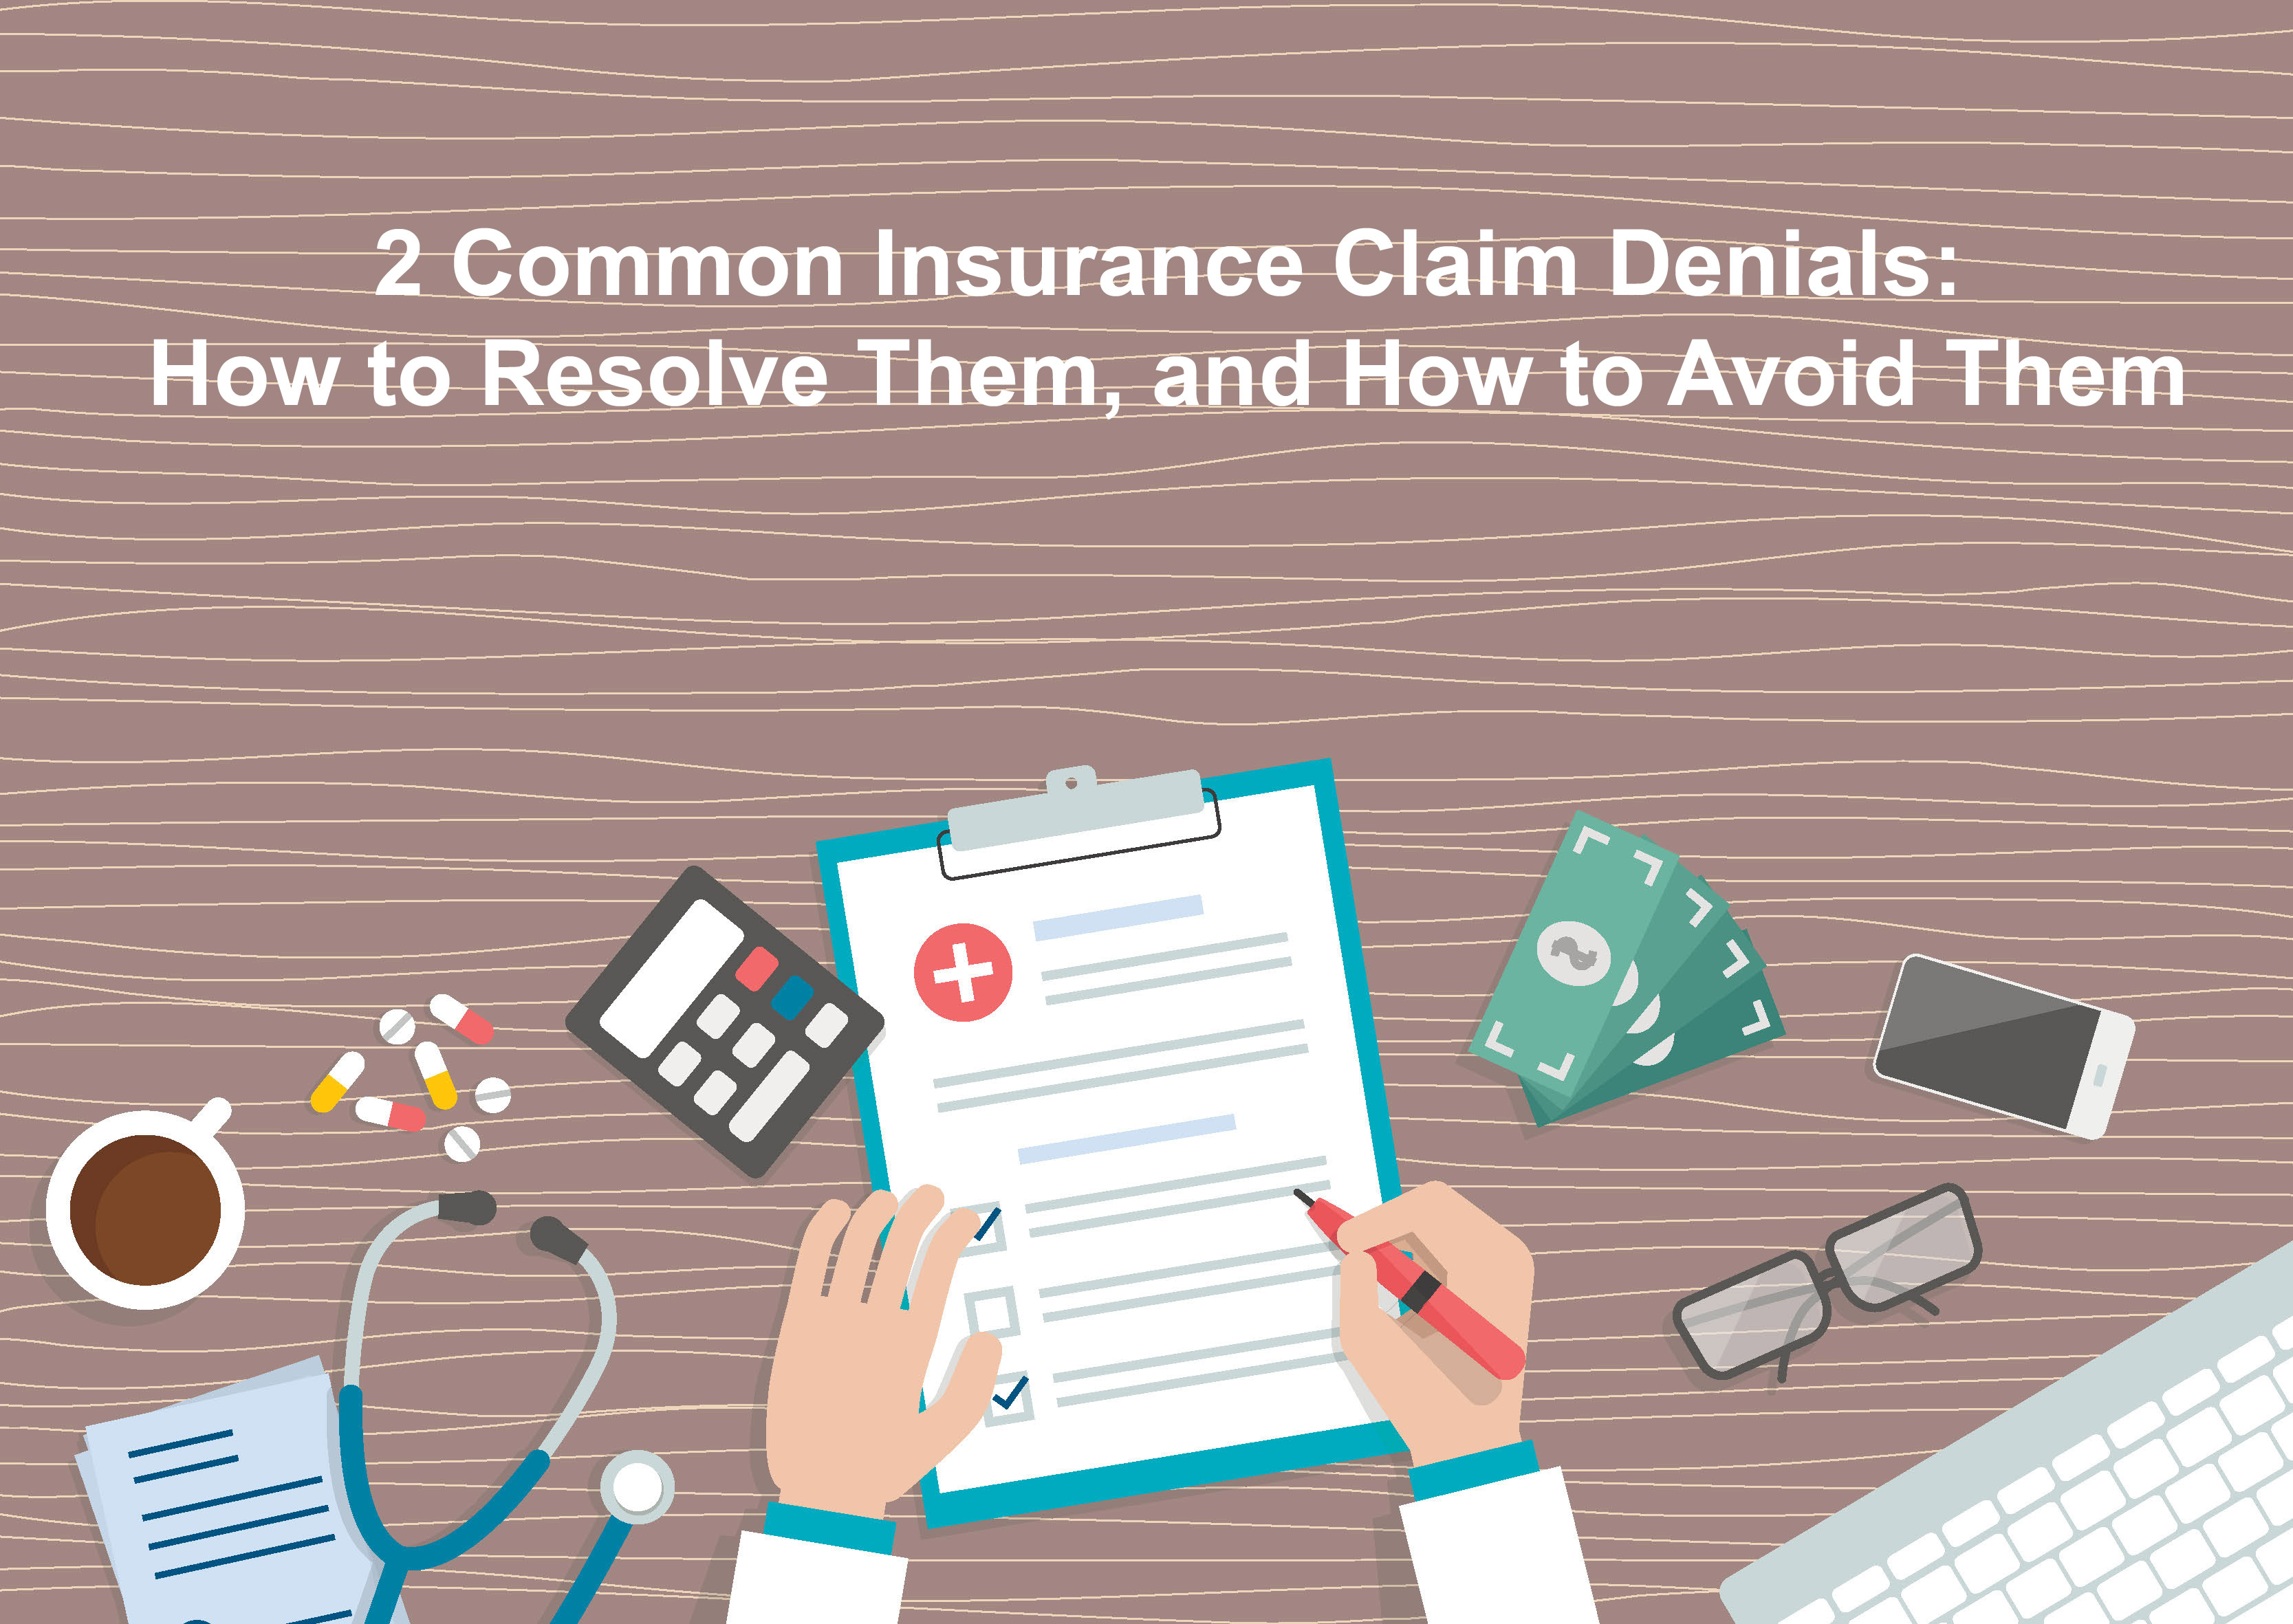 Manage Insurance Claim Denials More Effectively